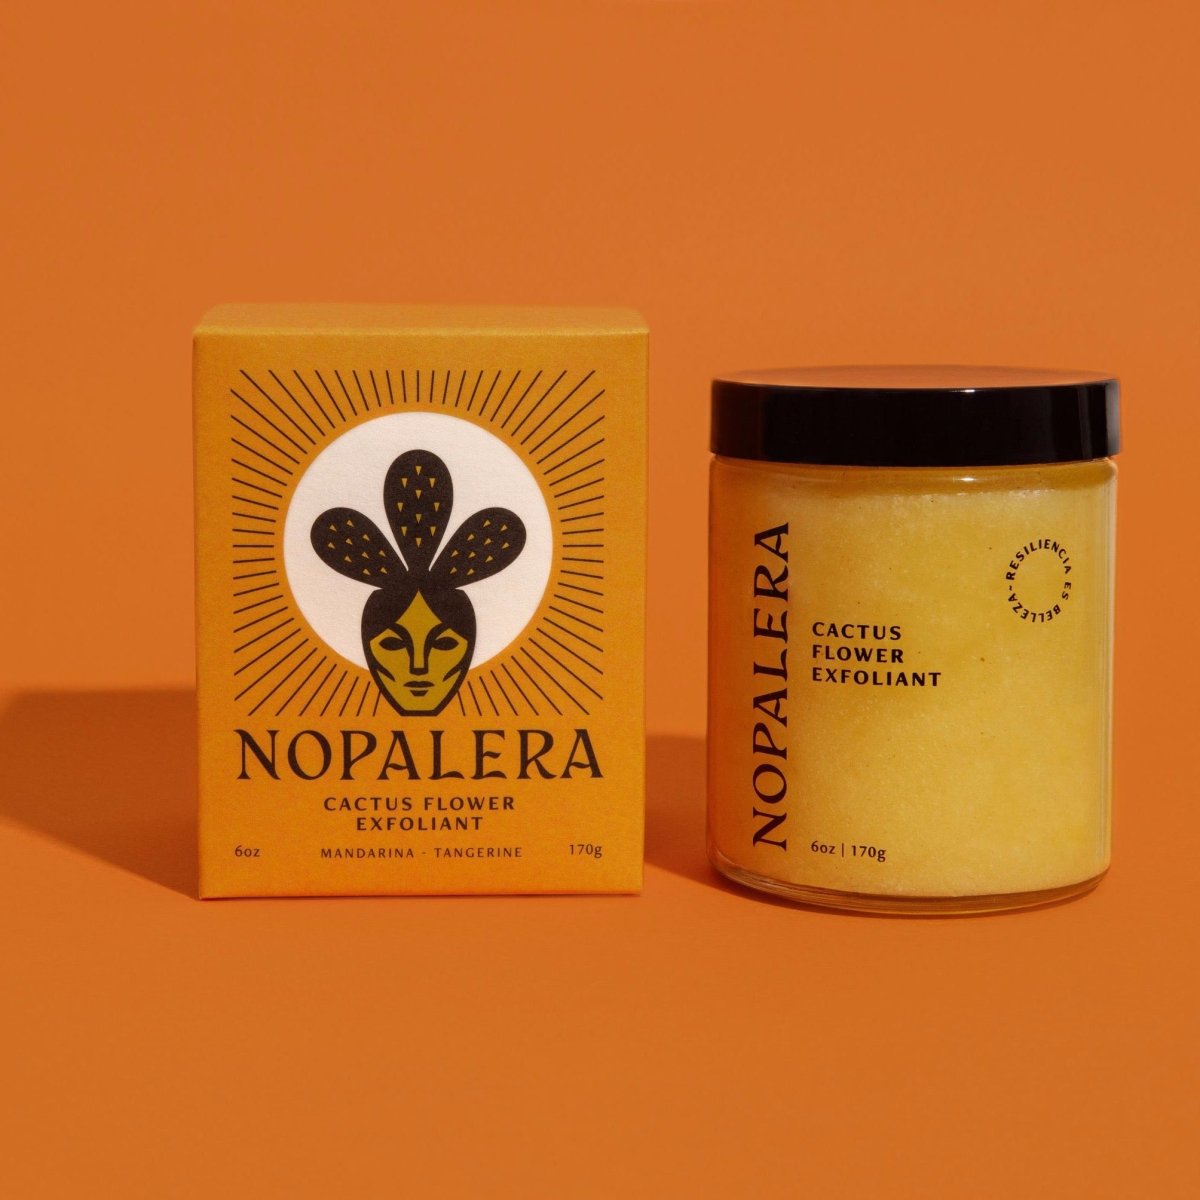 A glass jar of a yellow exfoliant mixture sits to the right of an orange box with a  cactus and facial illustration. The Cactus Flower Exfoliant is from Nopalera and made in Brooklyn, NY.